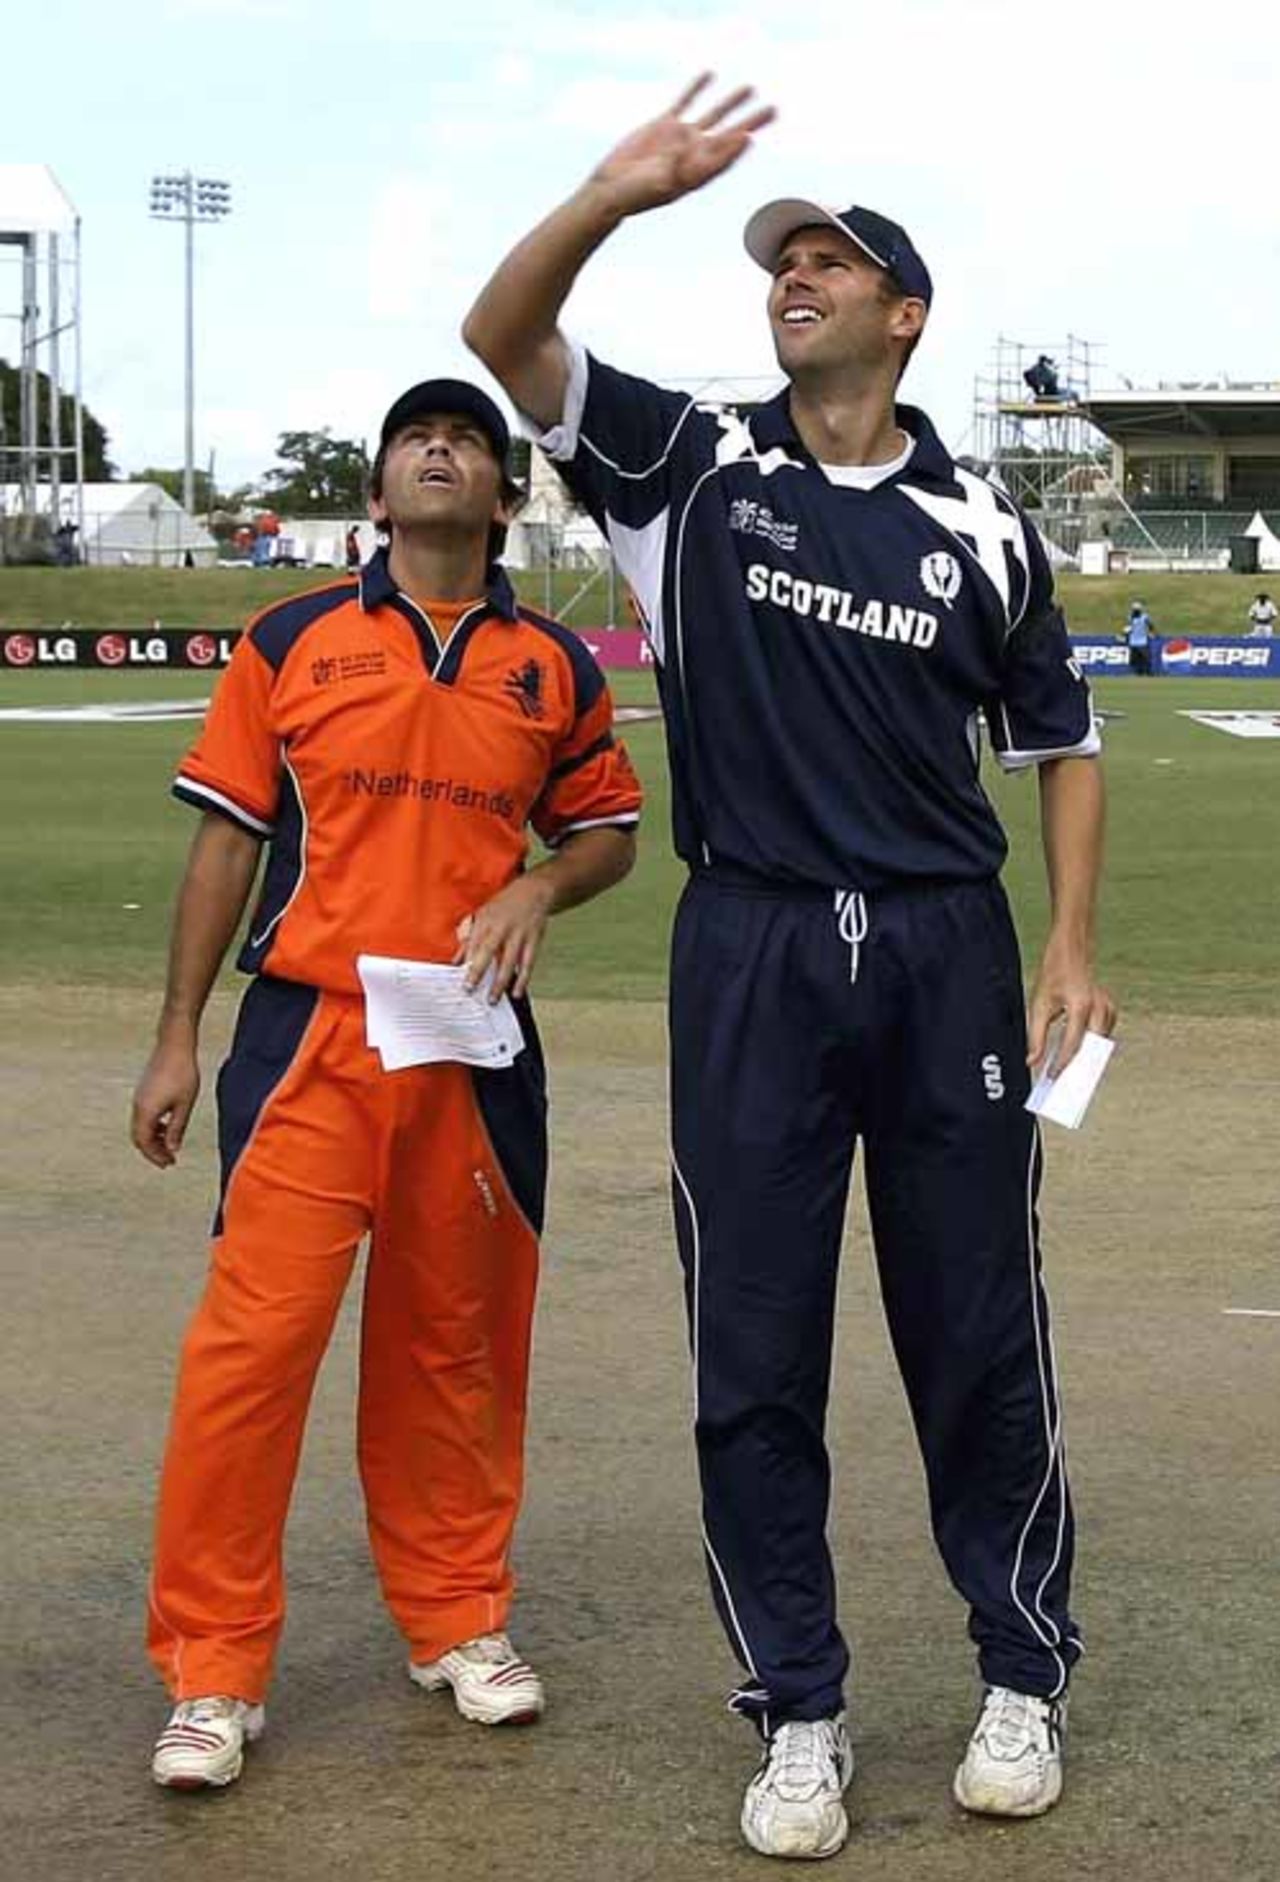 Jeroen Smits and Craig Wright toss;  Smits, who was standing in for Luuk van Troost, won the toss and put Scotland in, Netherlands v Scotland, Group A, St Kitts, March 22, 2007